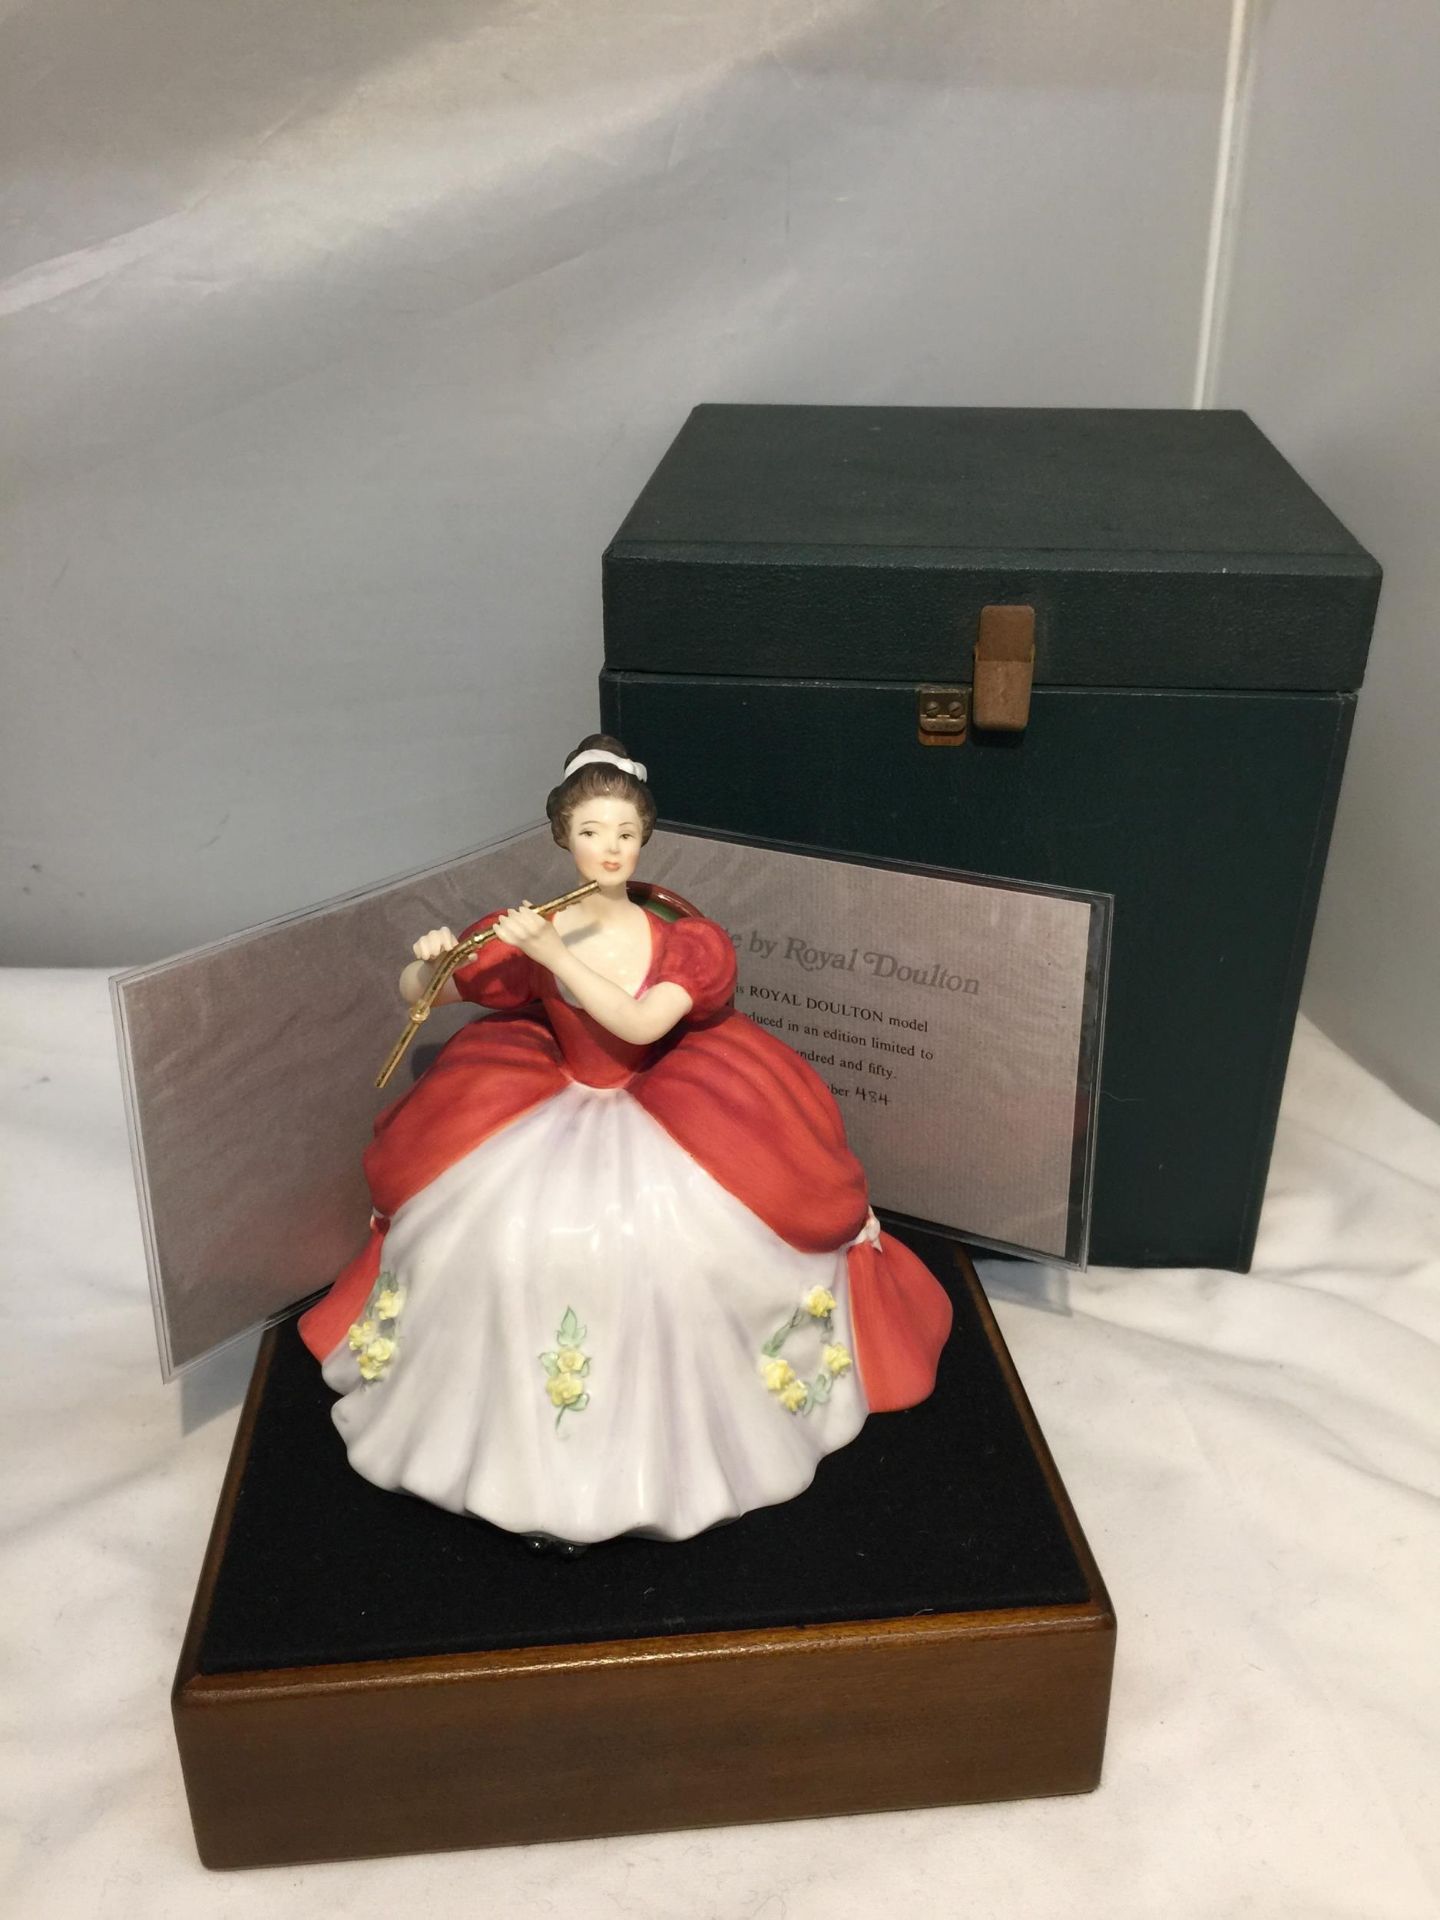 A ROYAL DOULTON FIGURINE, FLUTE HN2483, MODELLED BY PEGGY DAVIES AS PART OF THE LADY MUSICIANS